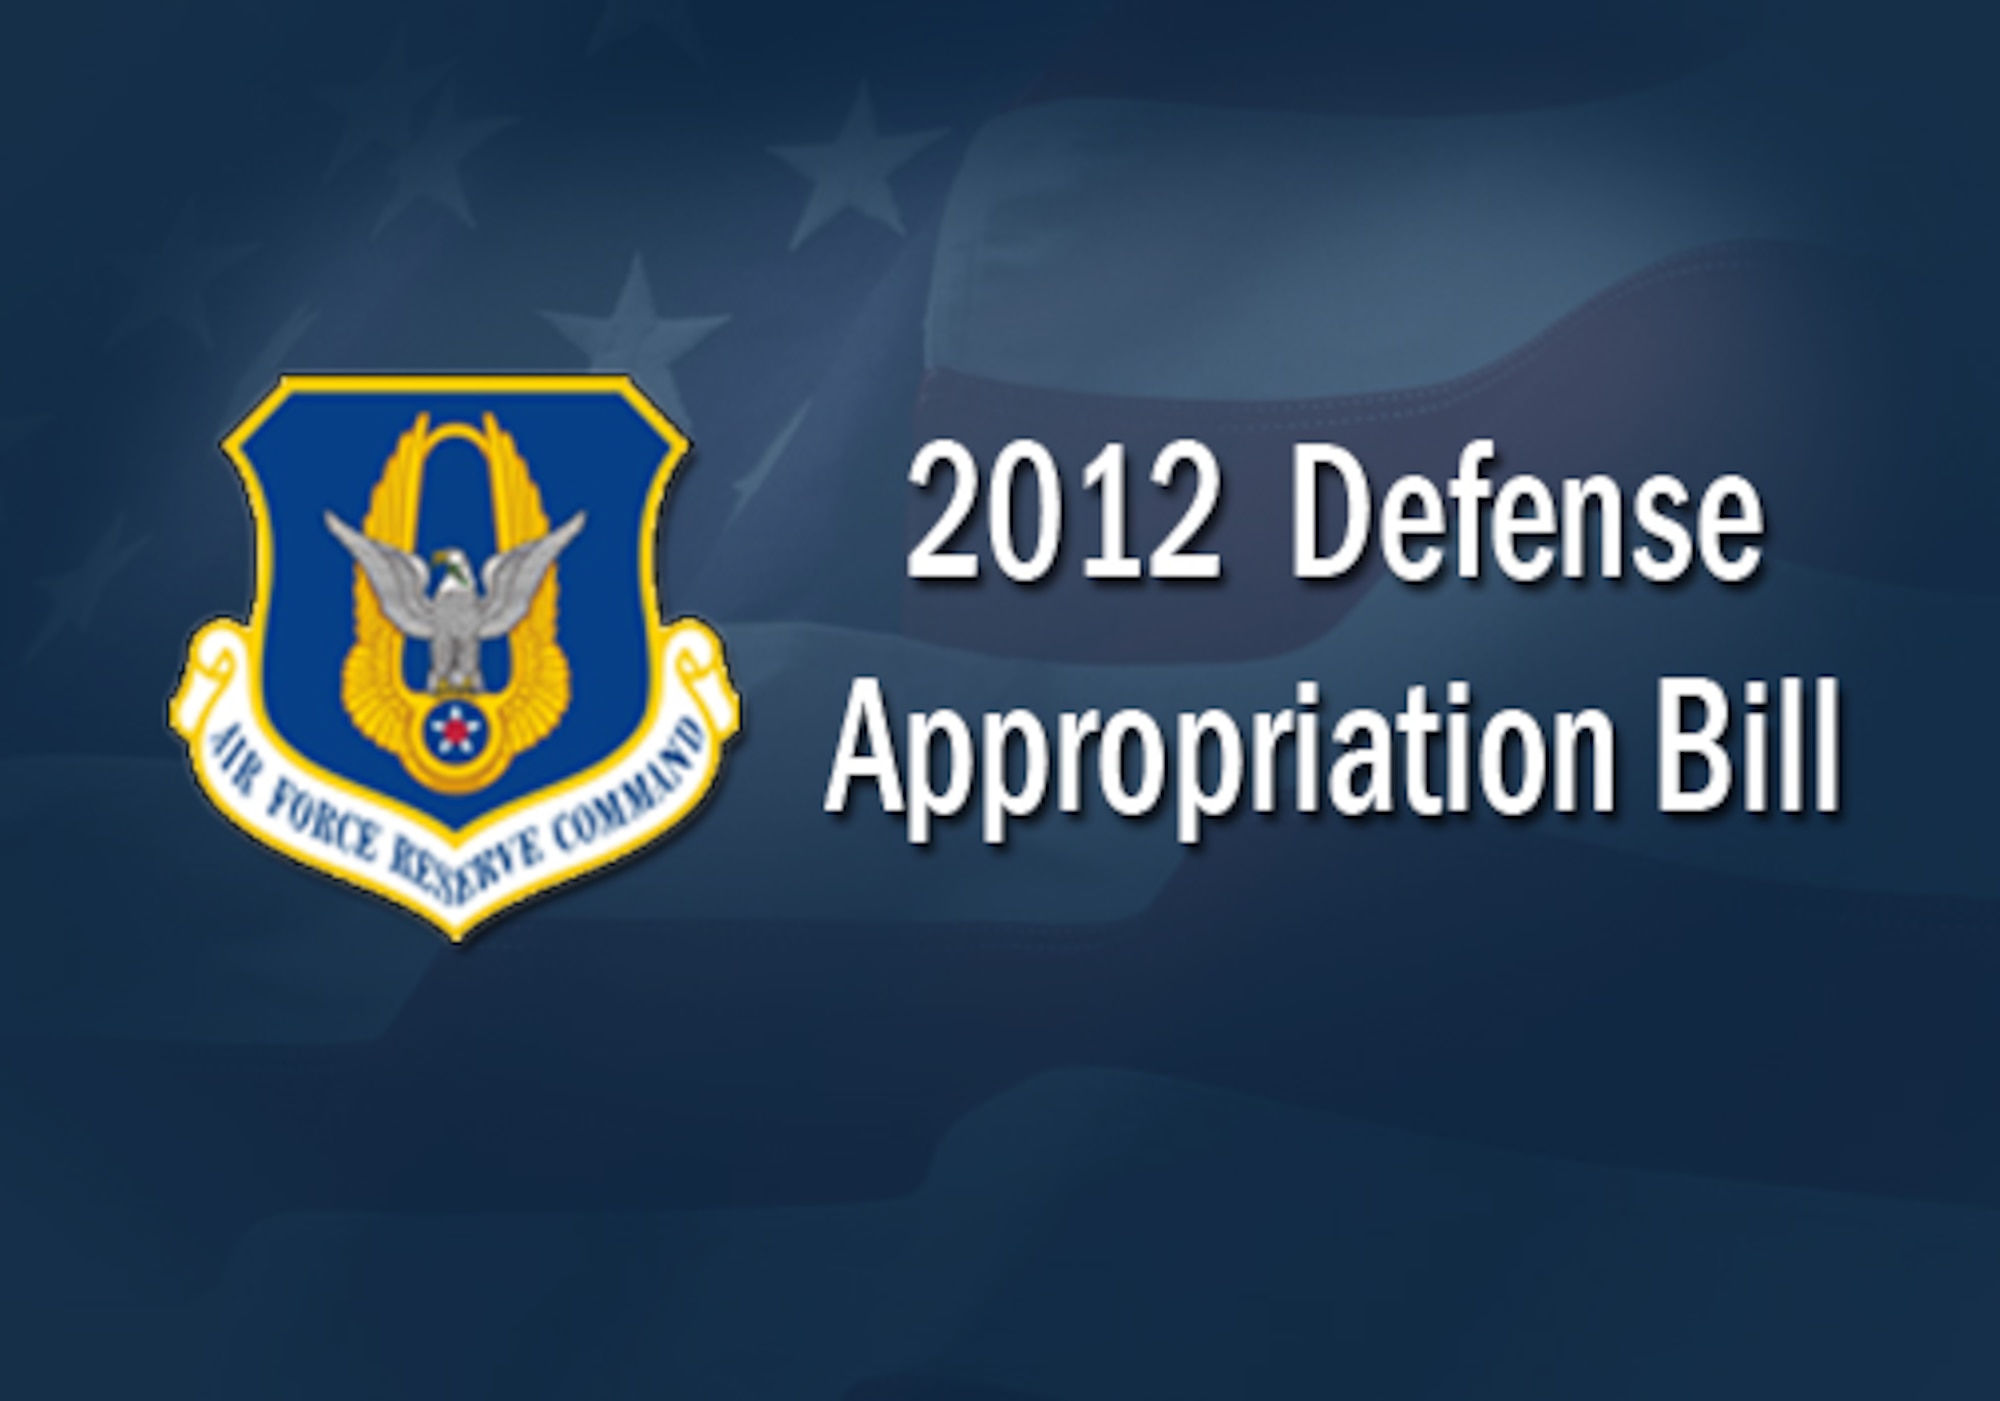 Defense bill authorizes pay raise and new mobilization rules (U.S. Air Force Illustration)

